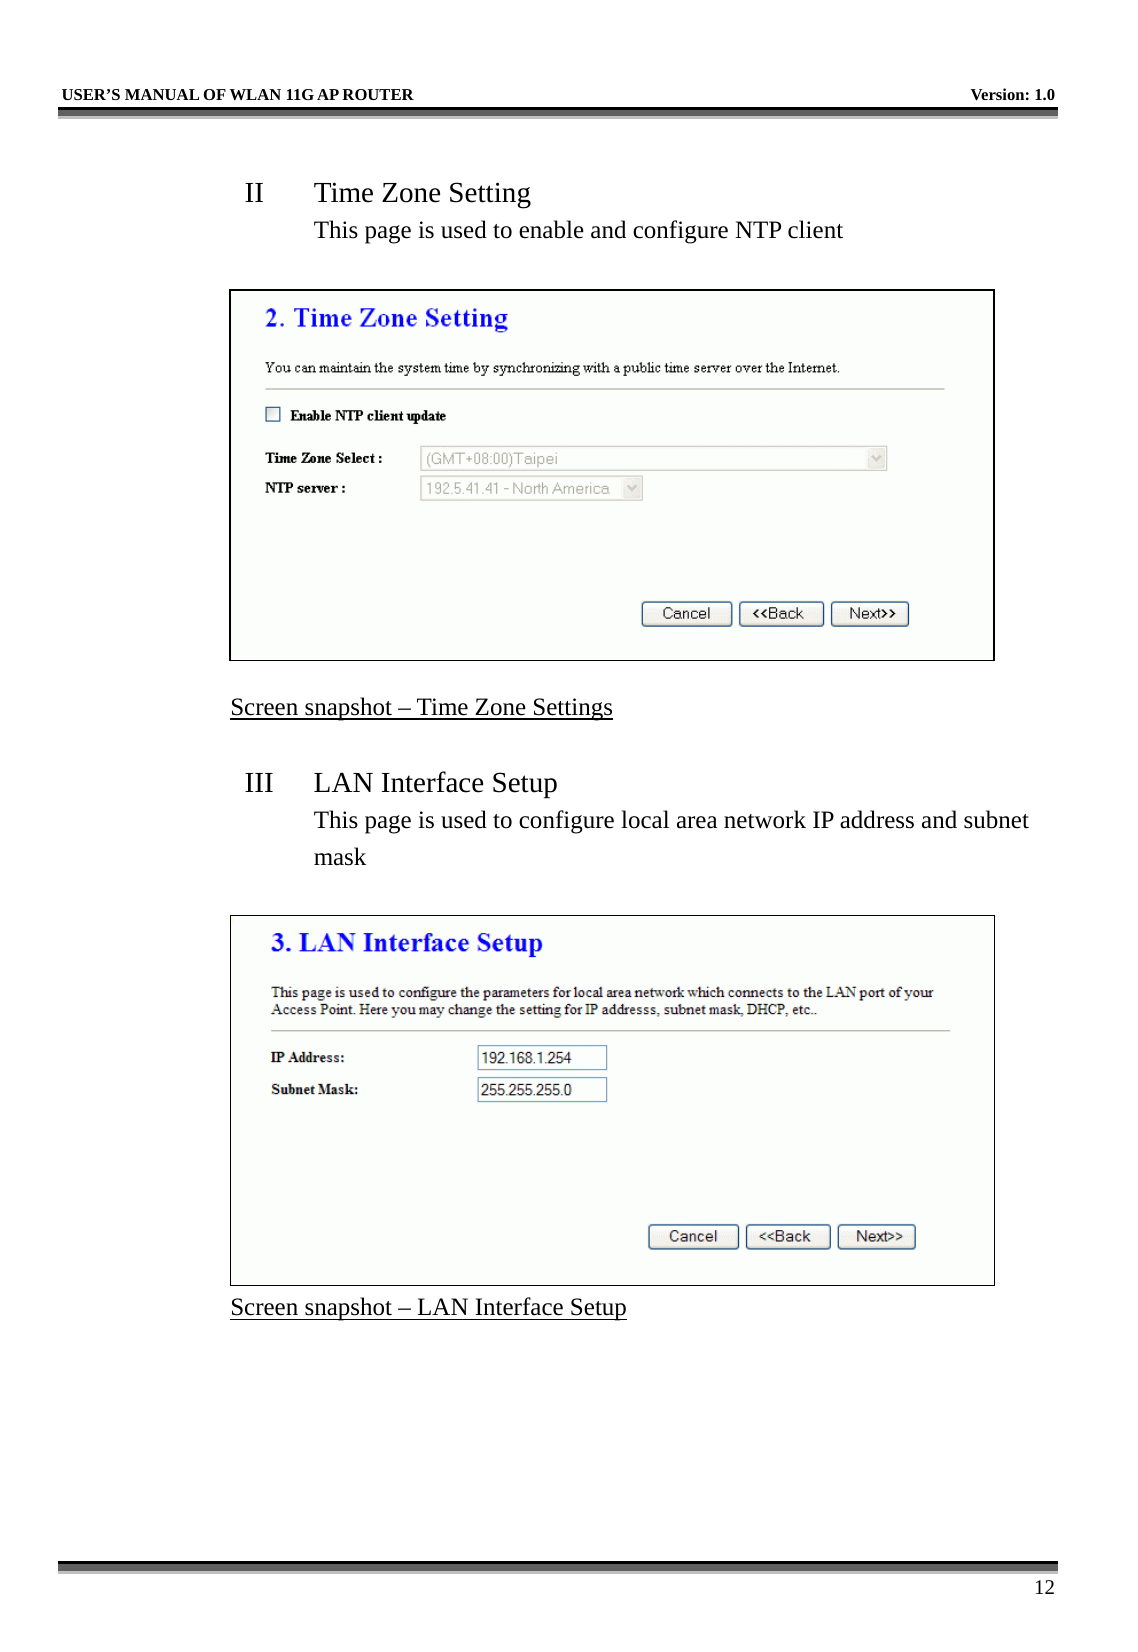   USER’S MANUAL OF WLAN 11G AP ROUTER    Version: 1.0     12  II  Time Zone Setting This page is used to enable and configure NTP client   Screen snapshot – Time Zone Settings  III  LAN Interface Setup This page is used to configure local area network IP address and subnet mask   Screen snapshot – LAN Interface Setup  